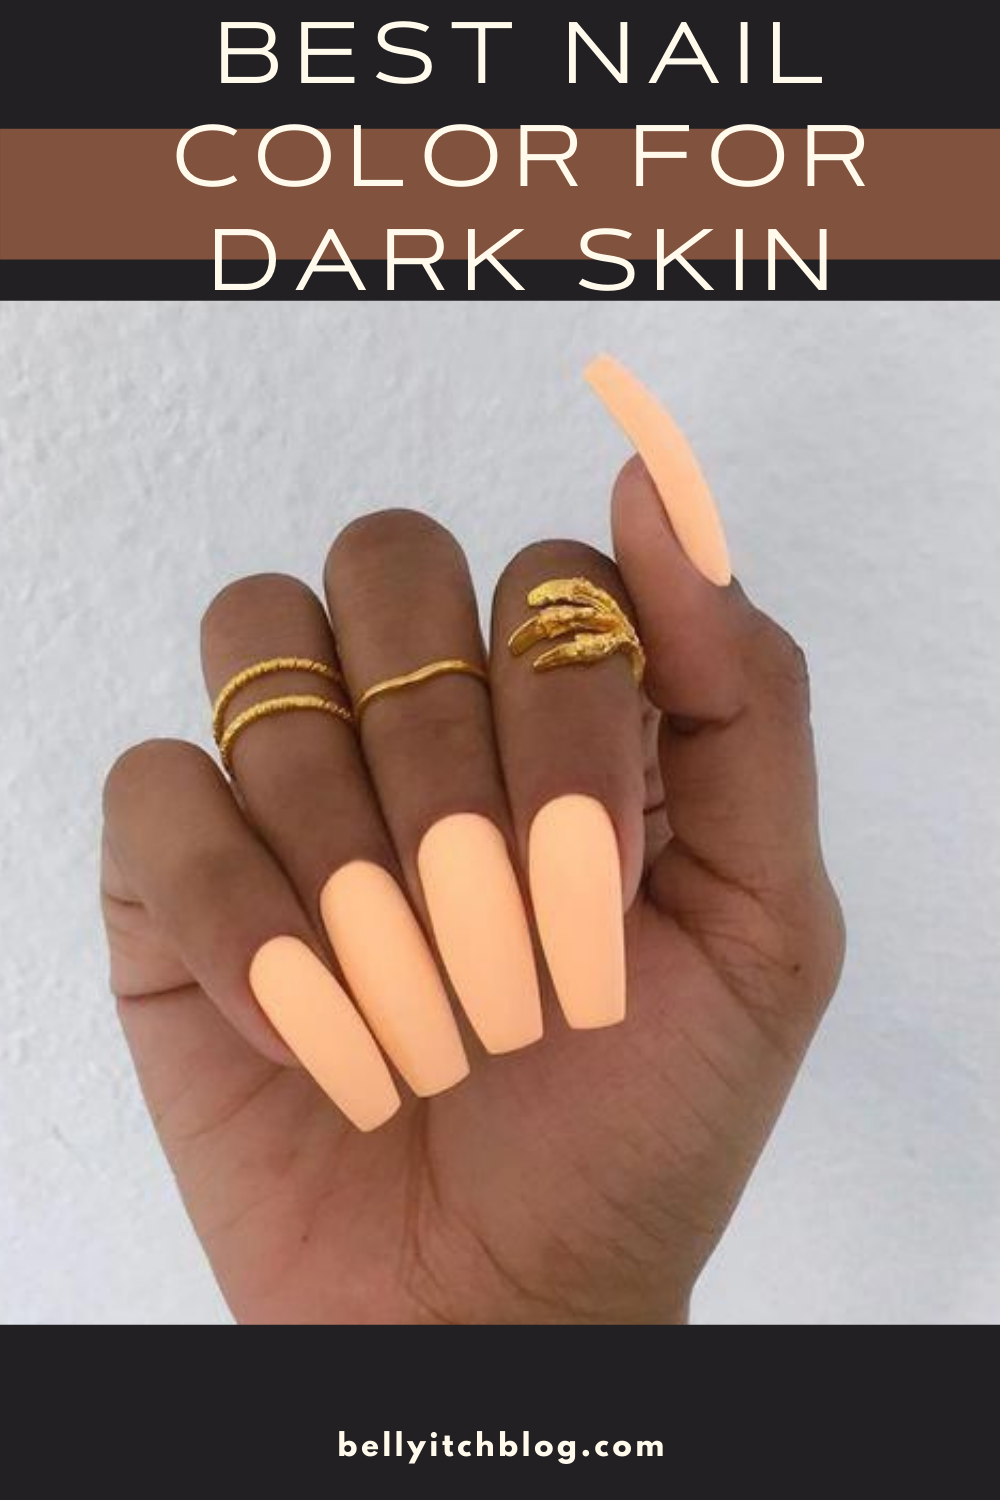 Nail colors Archives - BellyitchBlog